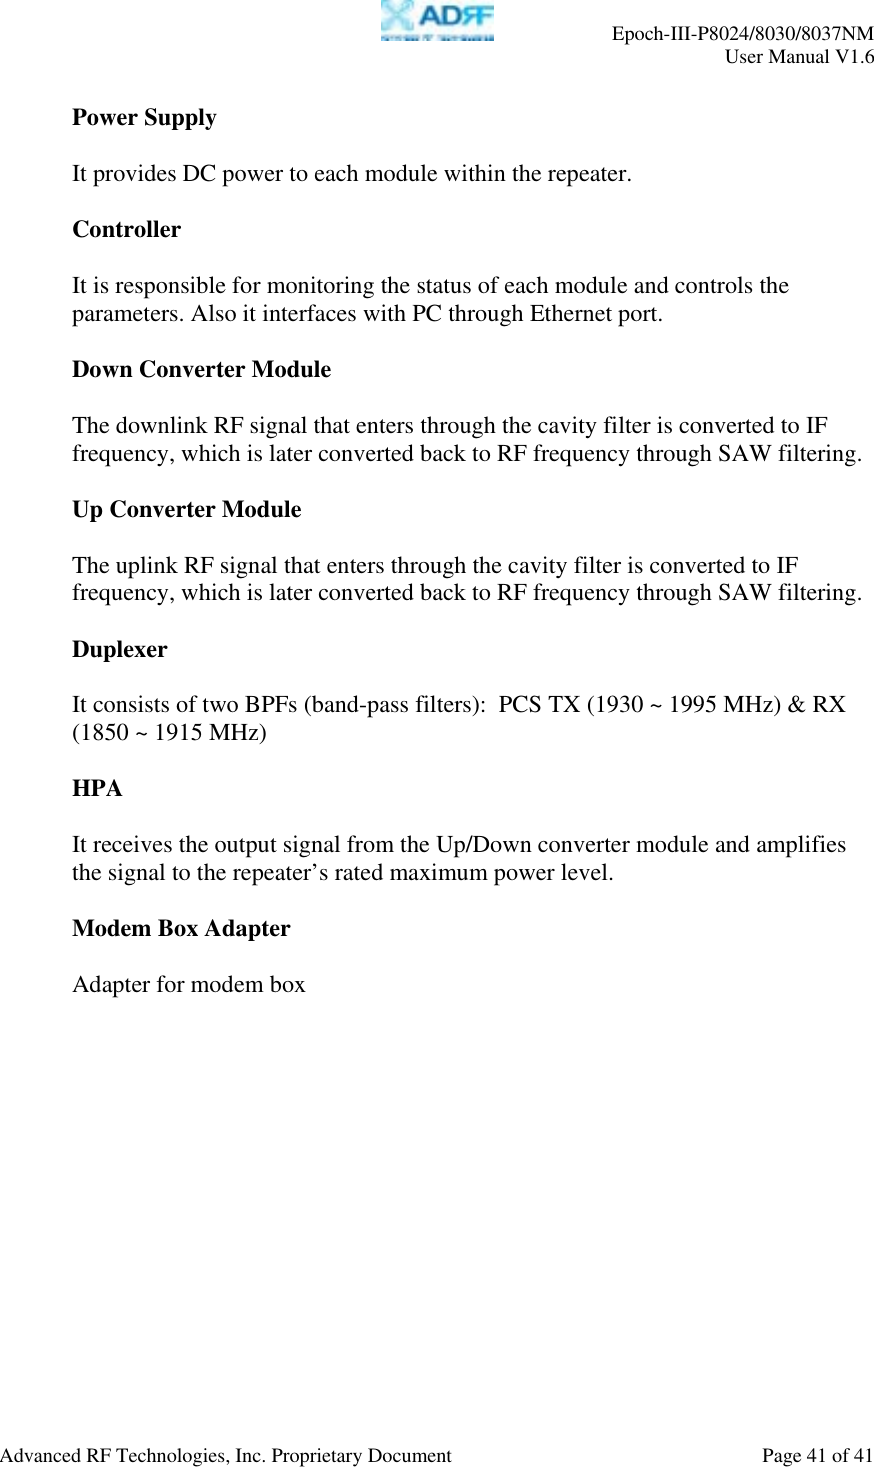     Epoch-III-P8024/8030/8037NM  User Manual V1.6  Advanced RF Technologies, Inc. Proprietary Document  Page 41 of 41  Power Supply  It provides DC power to each module within the repeater.  Controller  It is responsible for monitoring the status of each module and controls the parameters. Also it interfaces with PC through Ethernet port.  Down Converter Module  The downlink RF signal that enters through the cavity filter is converted to IF frequency, which is later converted back to RF frequency through SAW filtering.    Up Converter Module   The uplink RF signal that enters through the cavity filter is converted to IF frequency, which is later converted back to RF frequency through SAW filtering.    Duplexer  It consists of two BPFs (band-pass filters):  PCS TX (1930 ~ 1995 MHz) &amp; RX (1850 ~ 1915 MHz)  HPA   It receives the output signal from the Up/Down converter module and amplifies the signal to the repeater’s rated maximum power level.  Modem Box Adapter   Adapter for modem box  